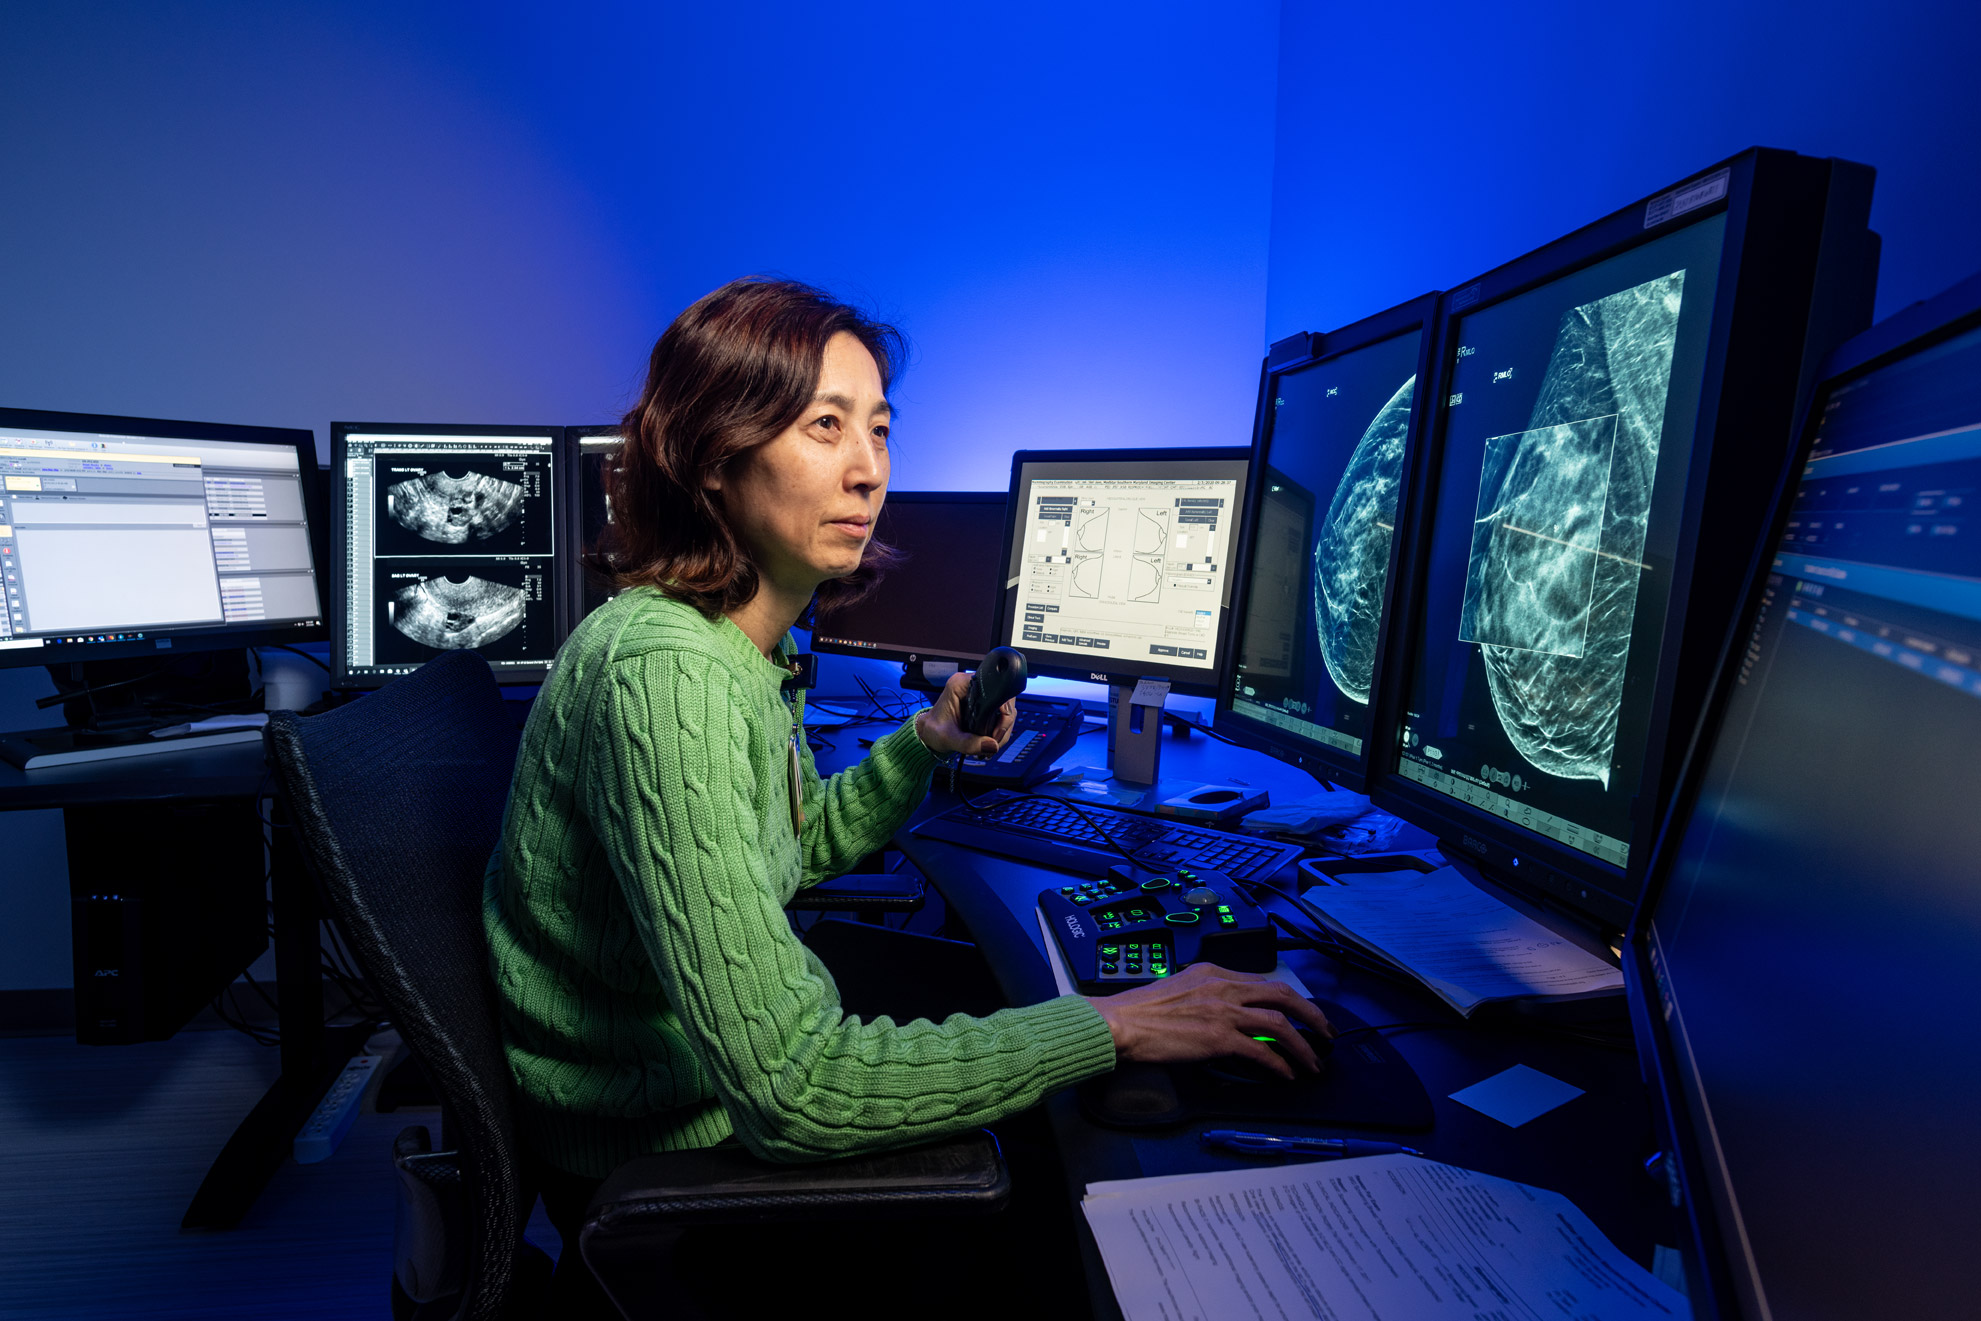 A doctor looks at mammograms on a computer screen with a blue background